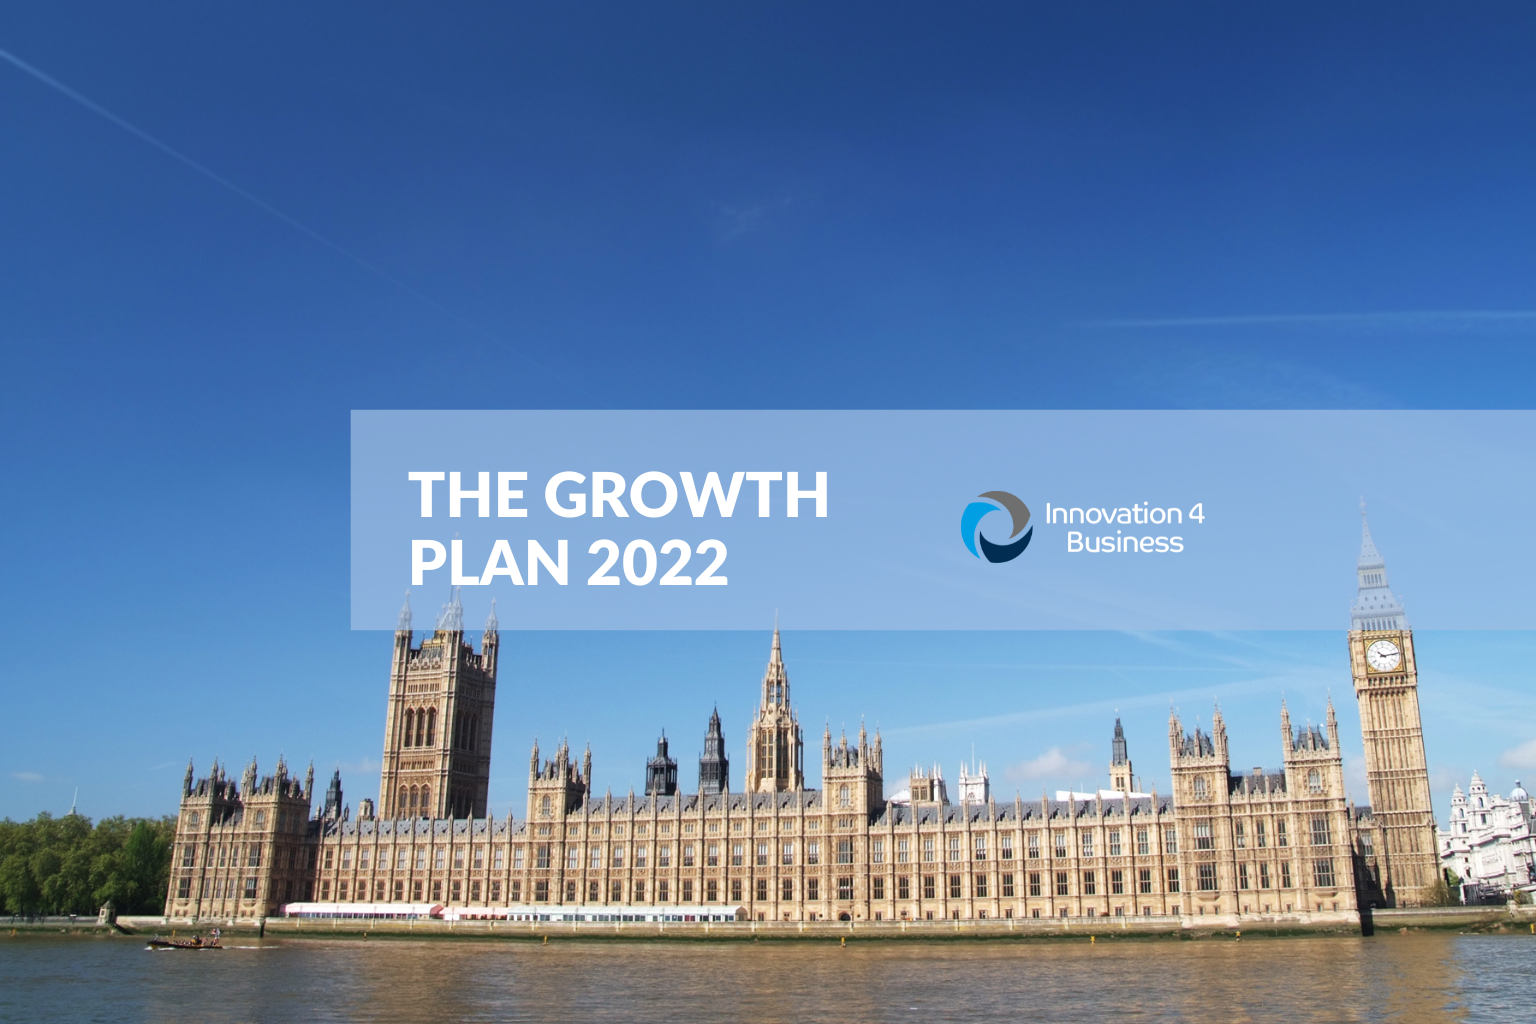 The Growth Plan 2022